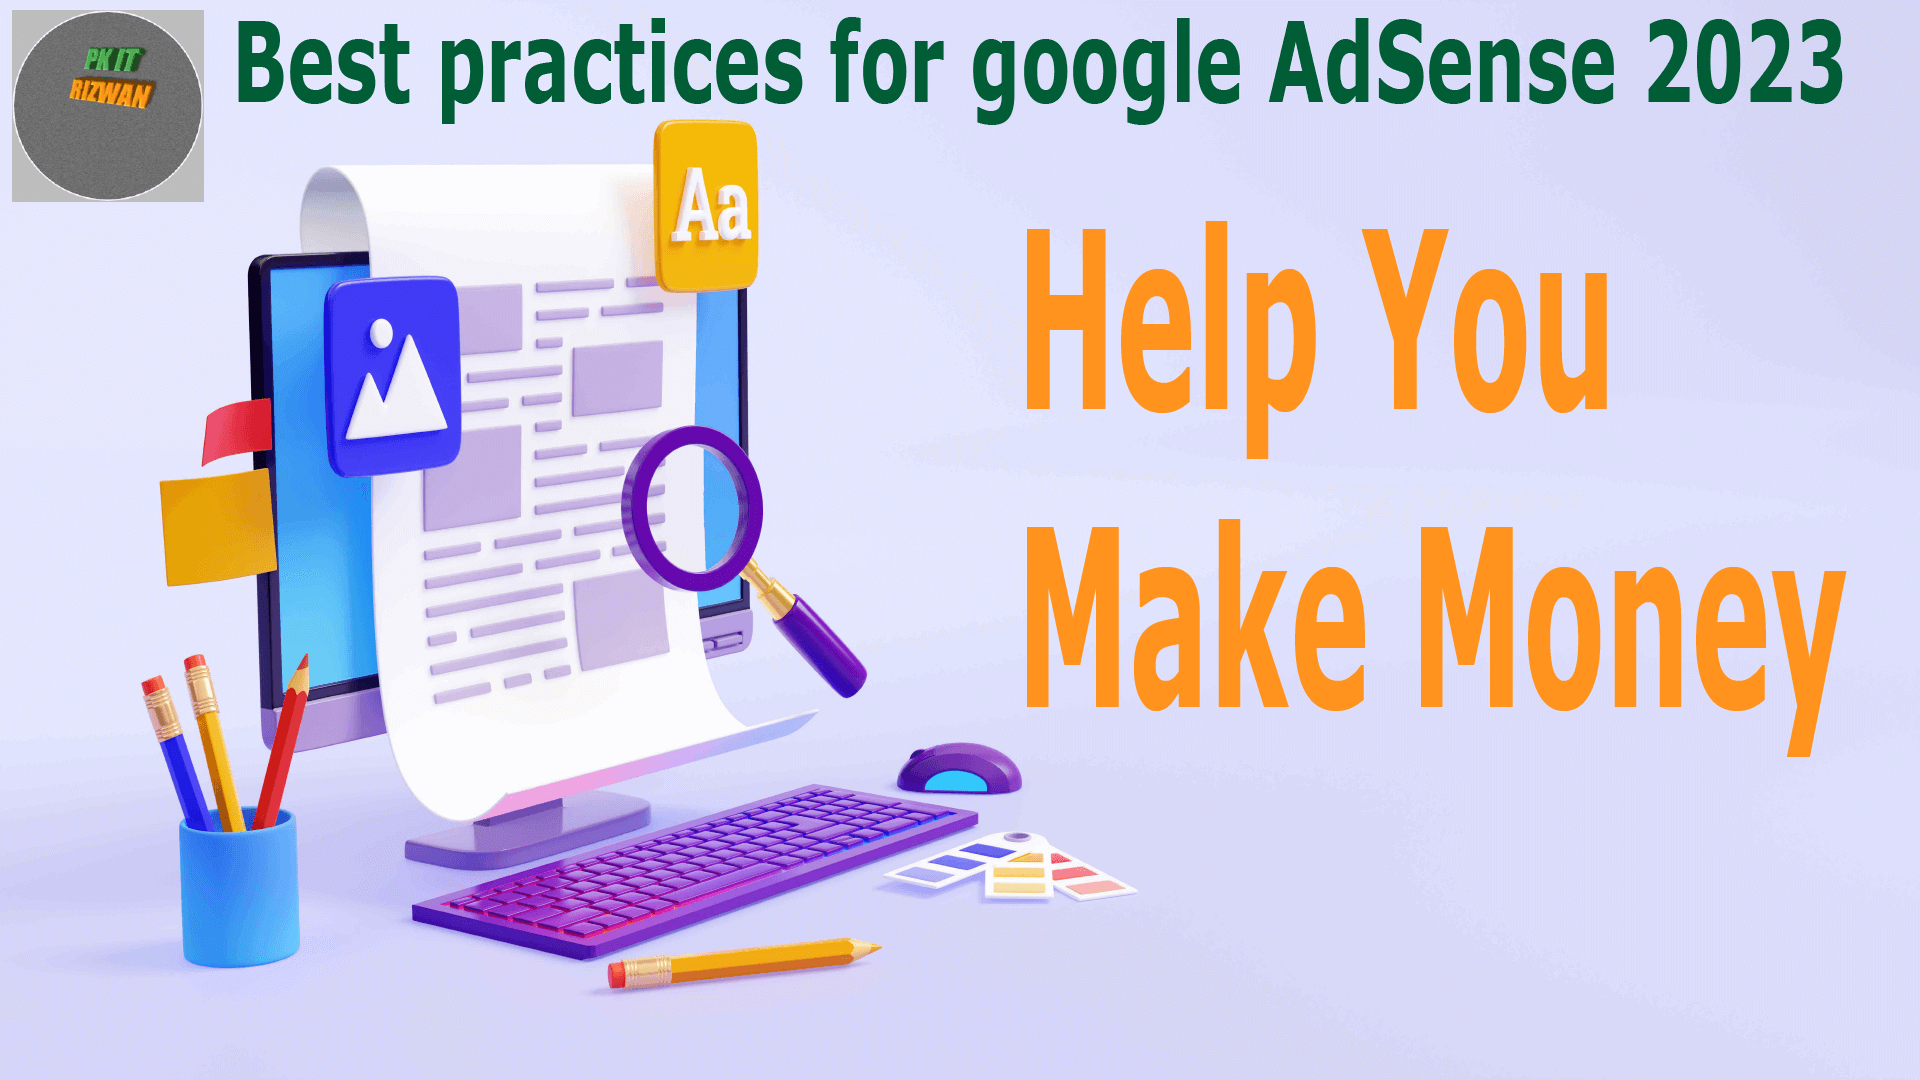 What are the best practices for Google AdSense?